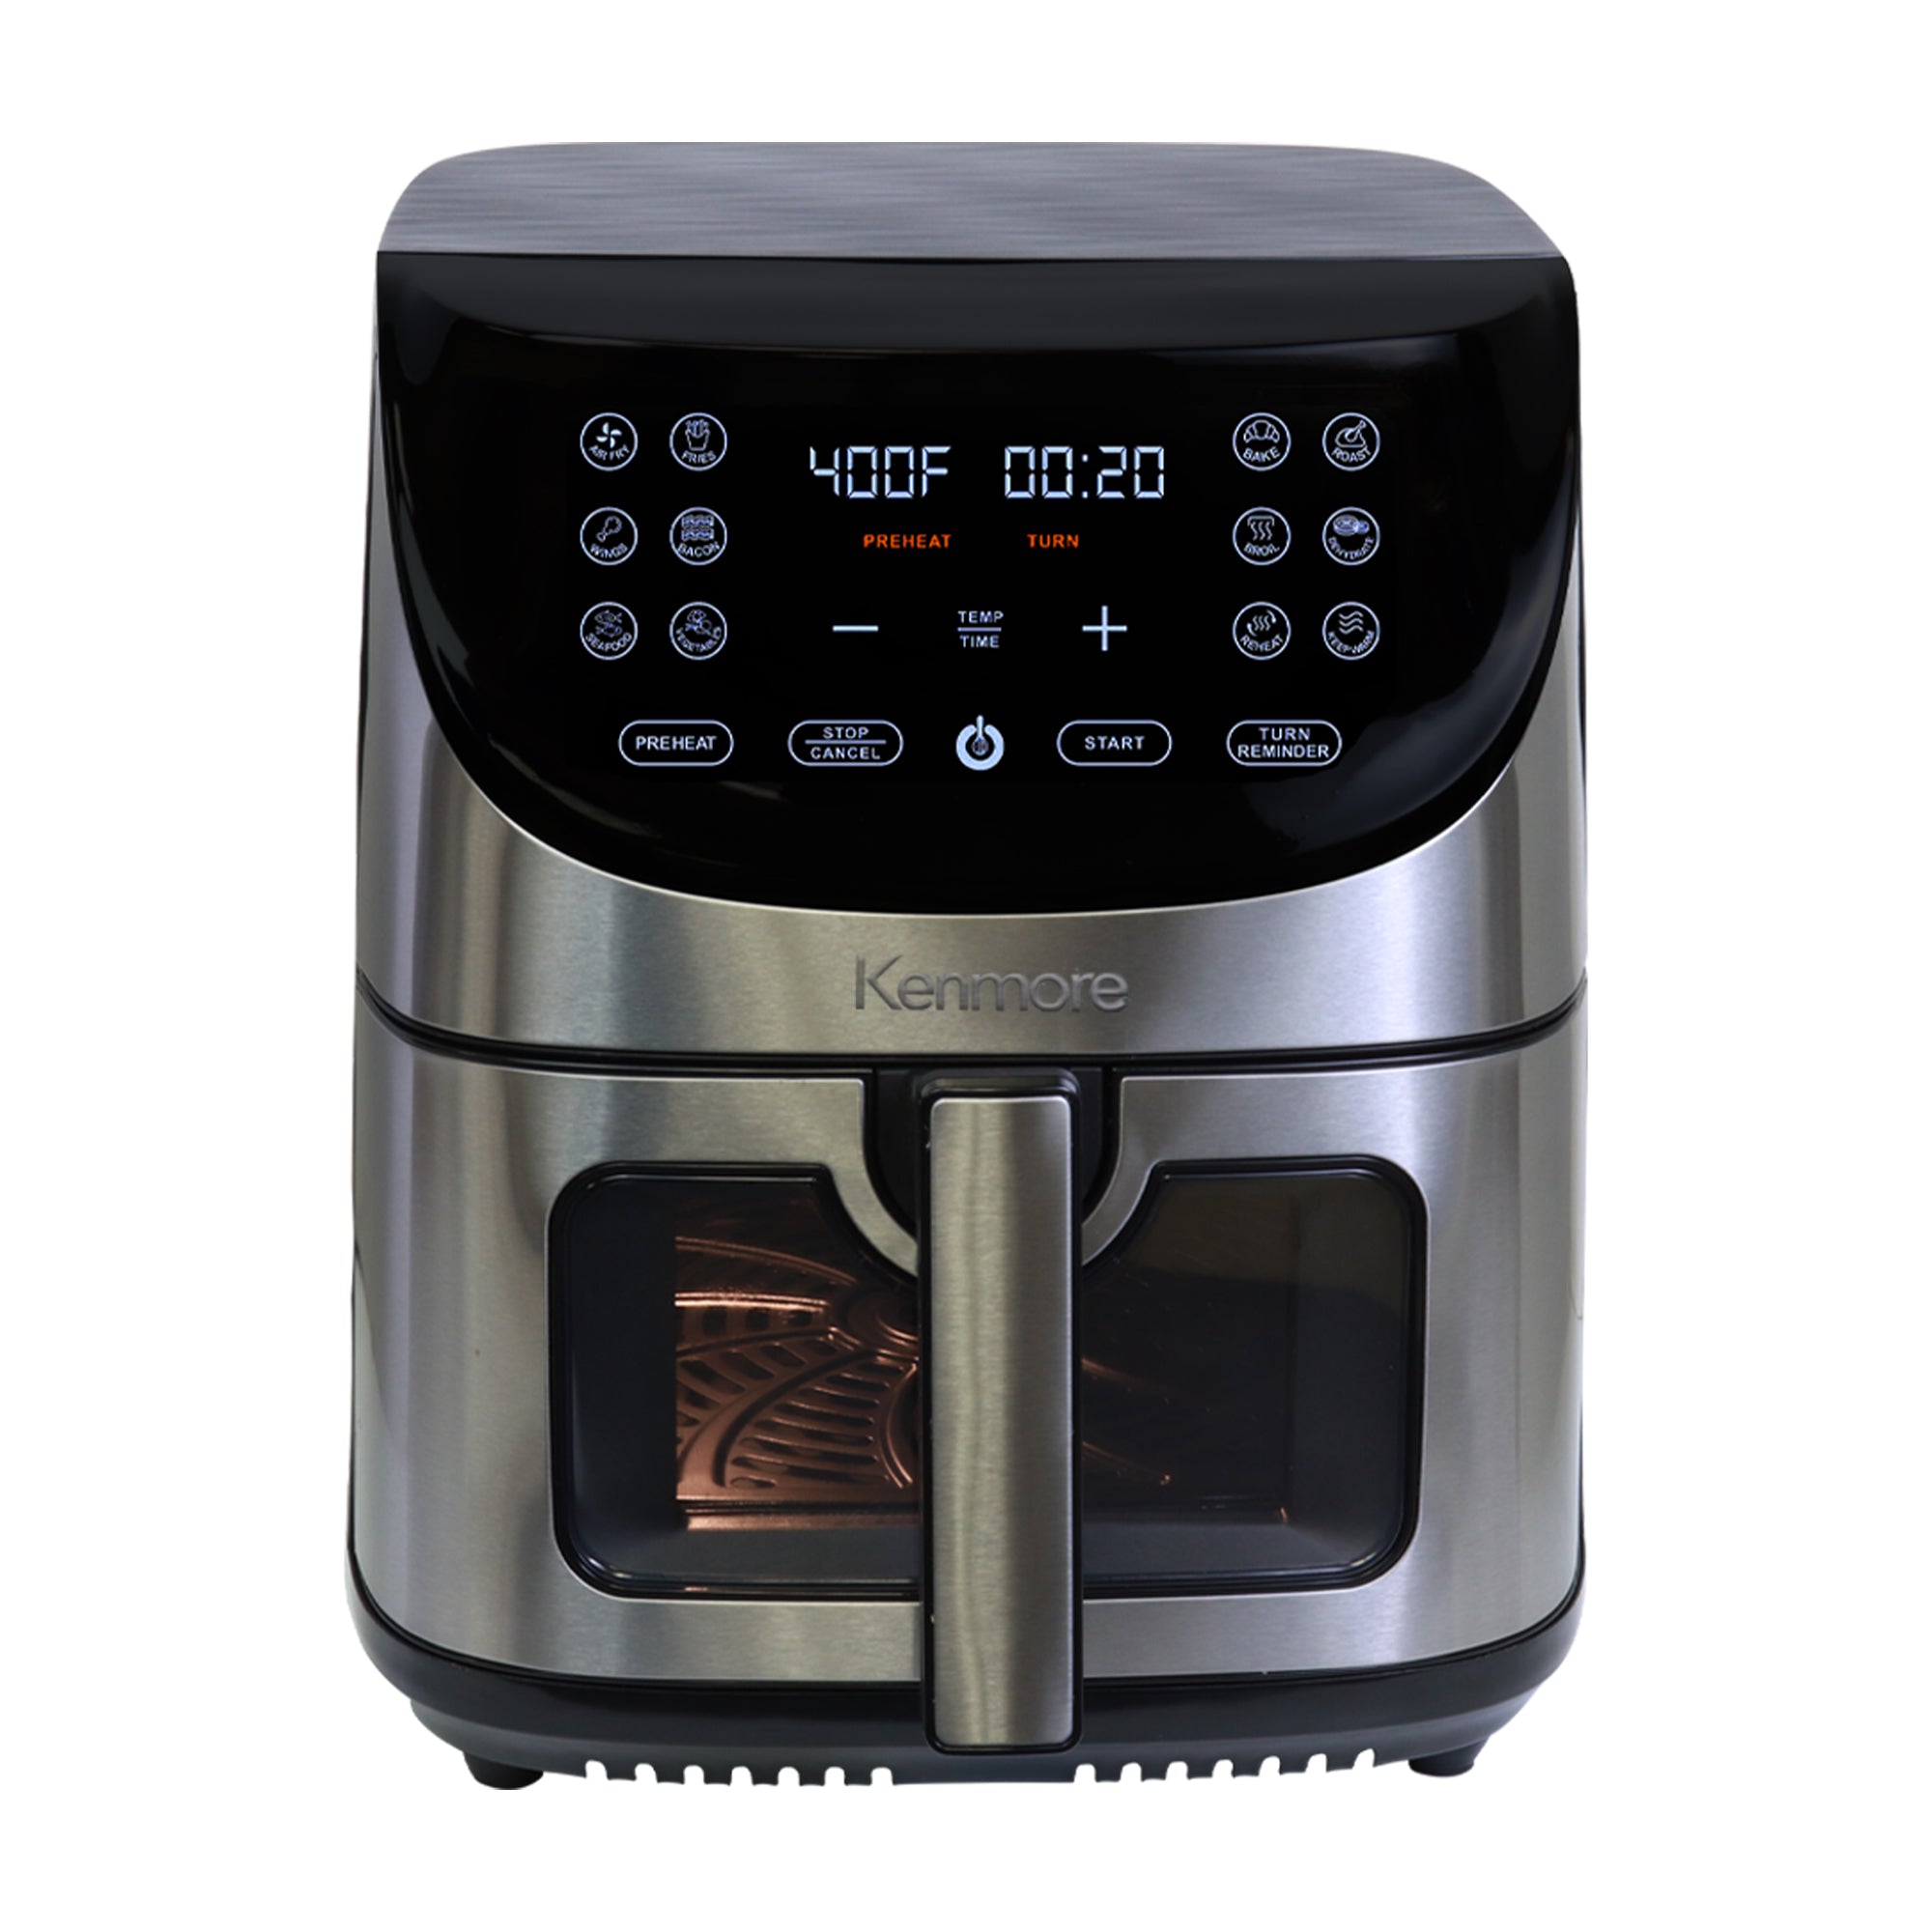 Kenmore stainless steel digital air fryer on a white background